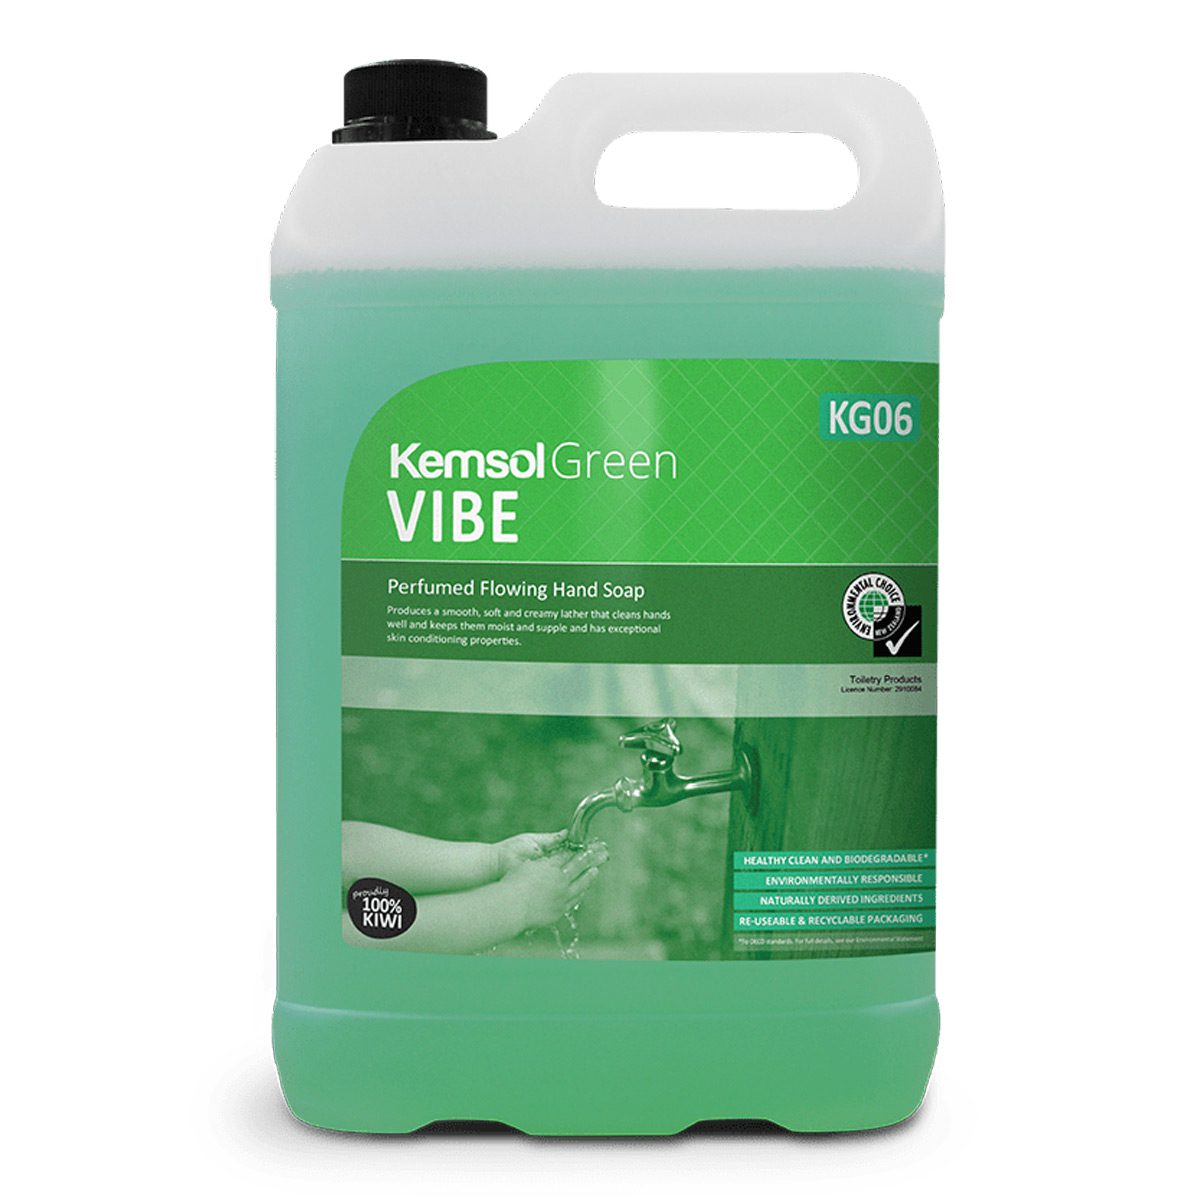 cleaning-products-environmental-kemsol-green-vibe-perfumed-flowing-hand-soap-5L-litre-smooth-soft-creamy-lather-cleans-hands-moist-supple-exceptional-skin conditioning-properties-vjs-distributors-KVIBE